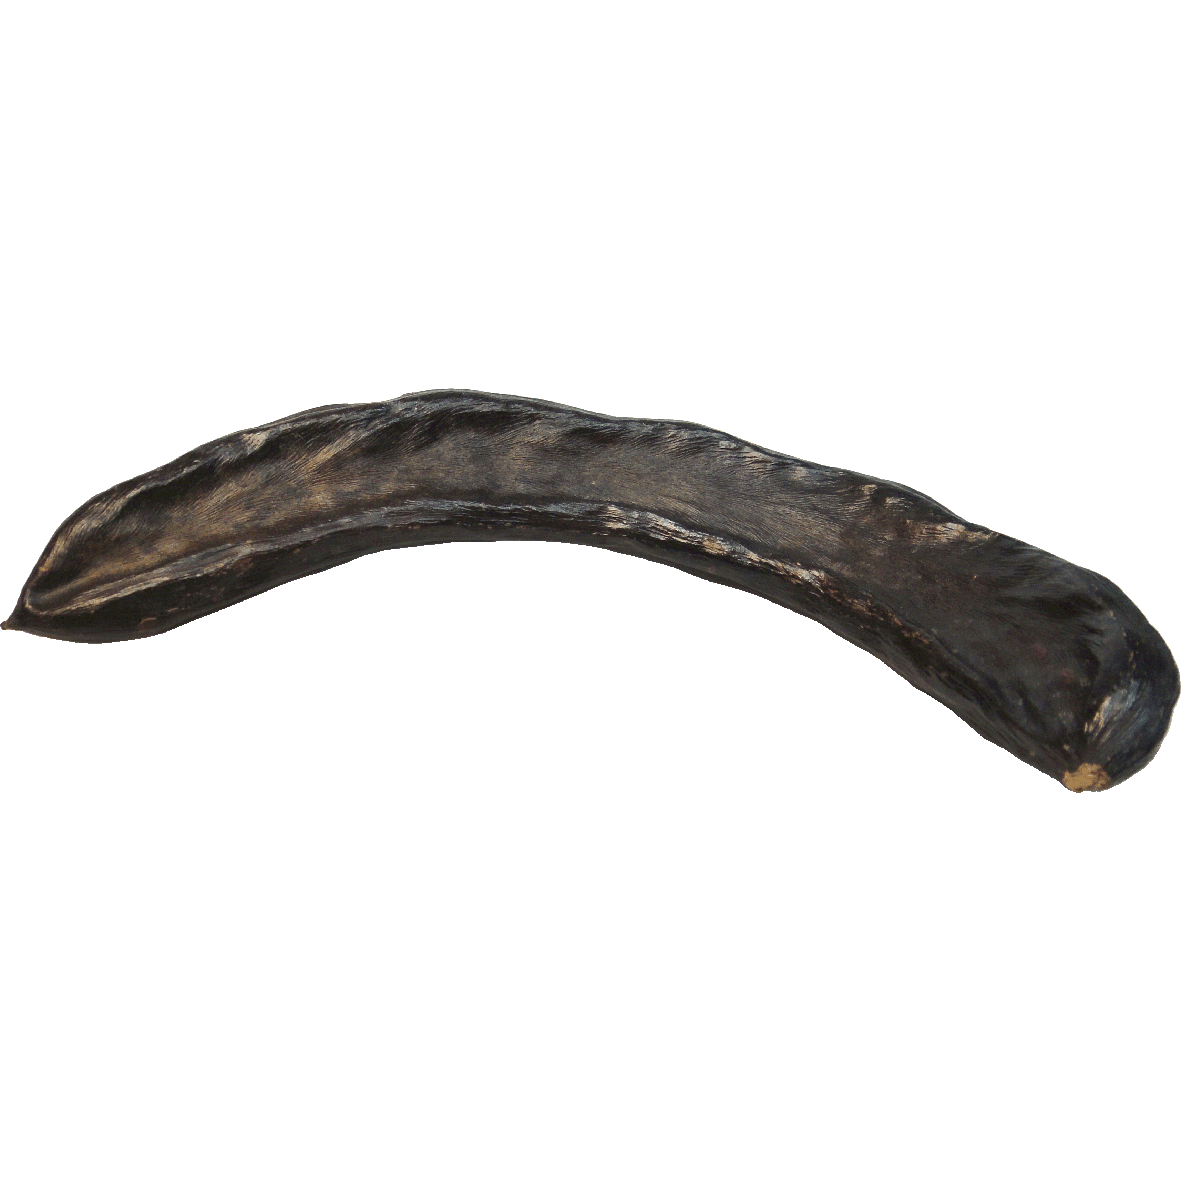 Mediterranean and Western Asia, Pod of the Carob Tree (reverse)